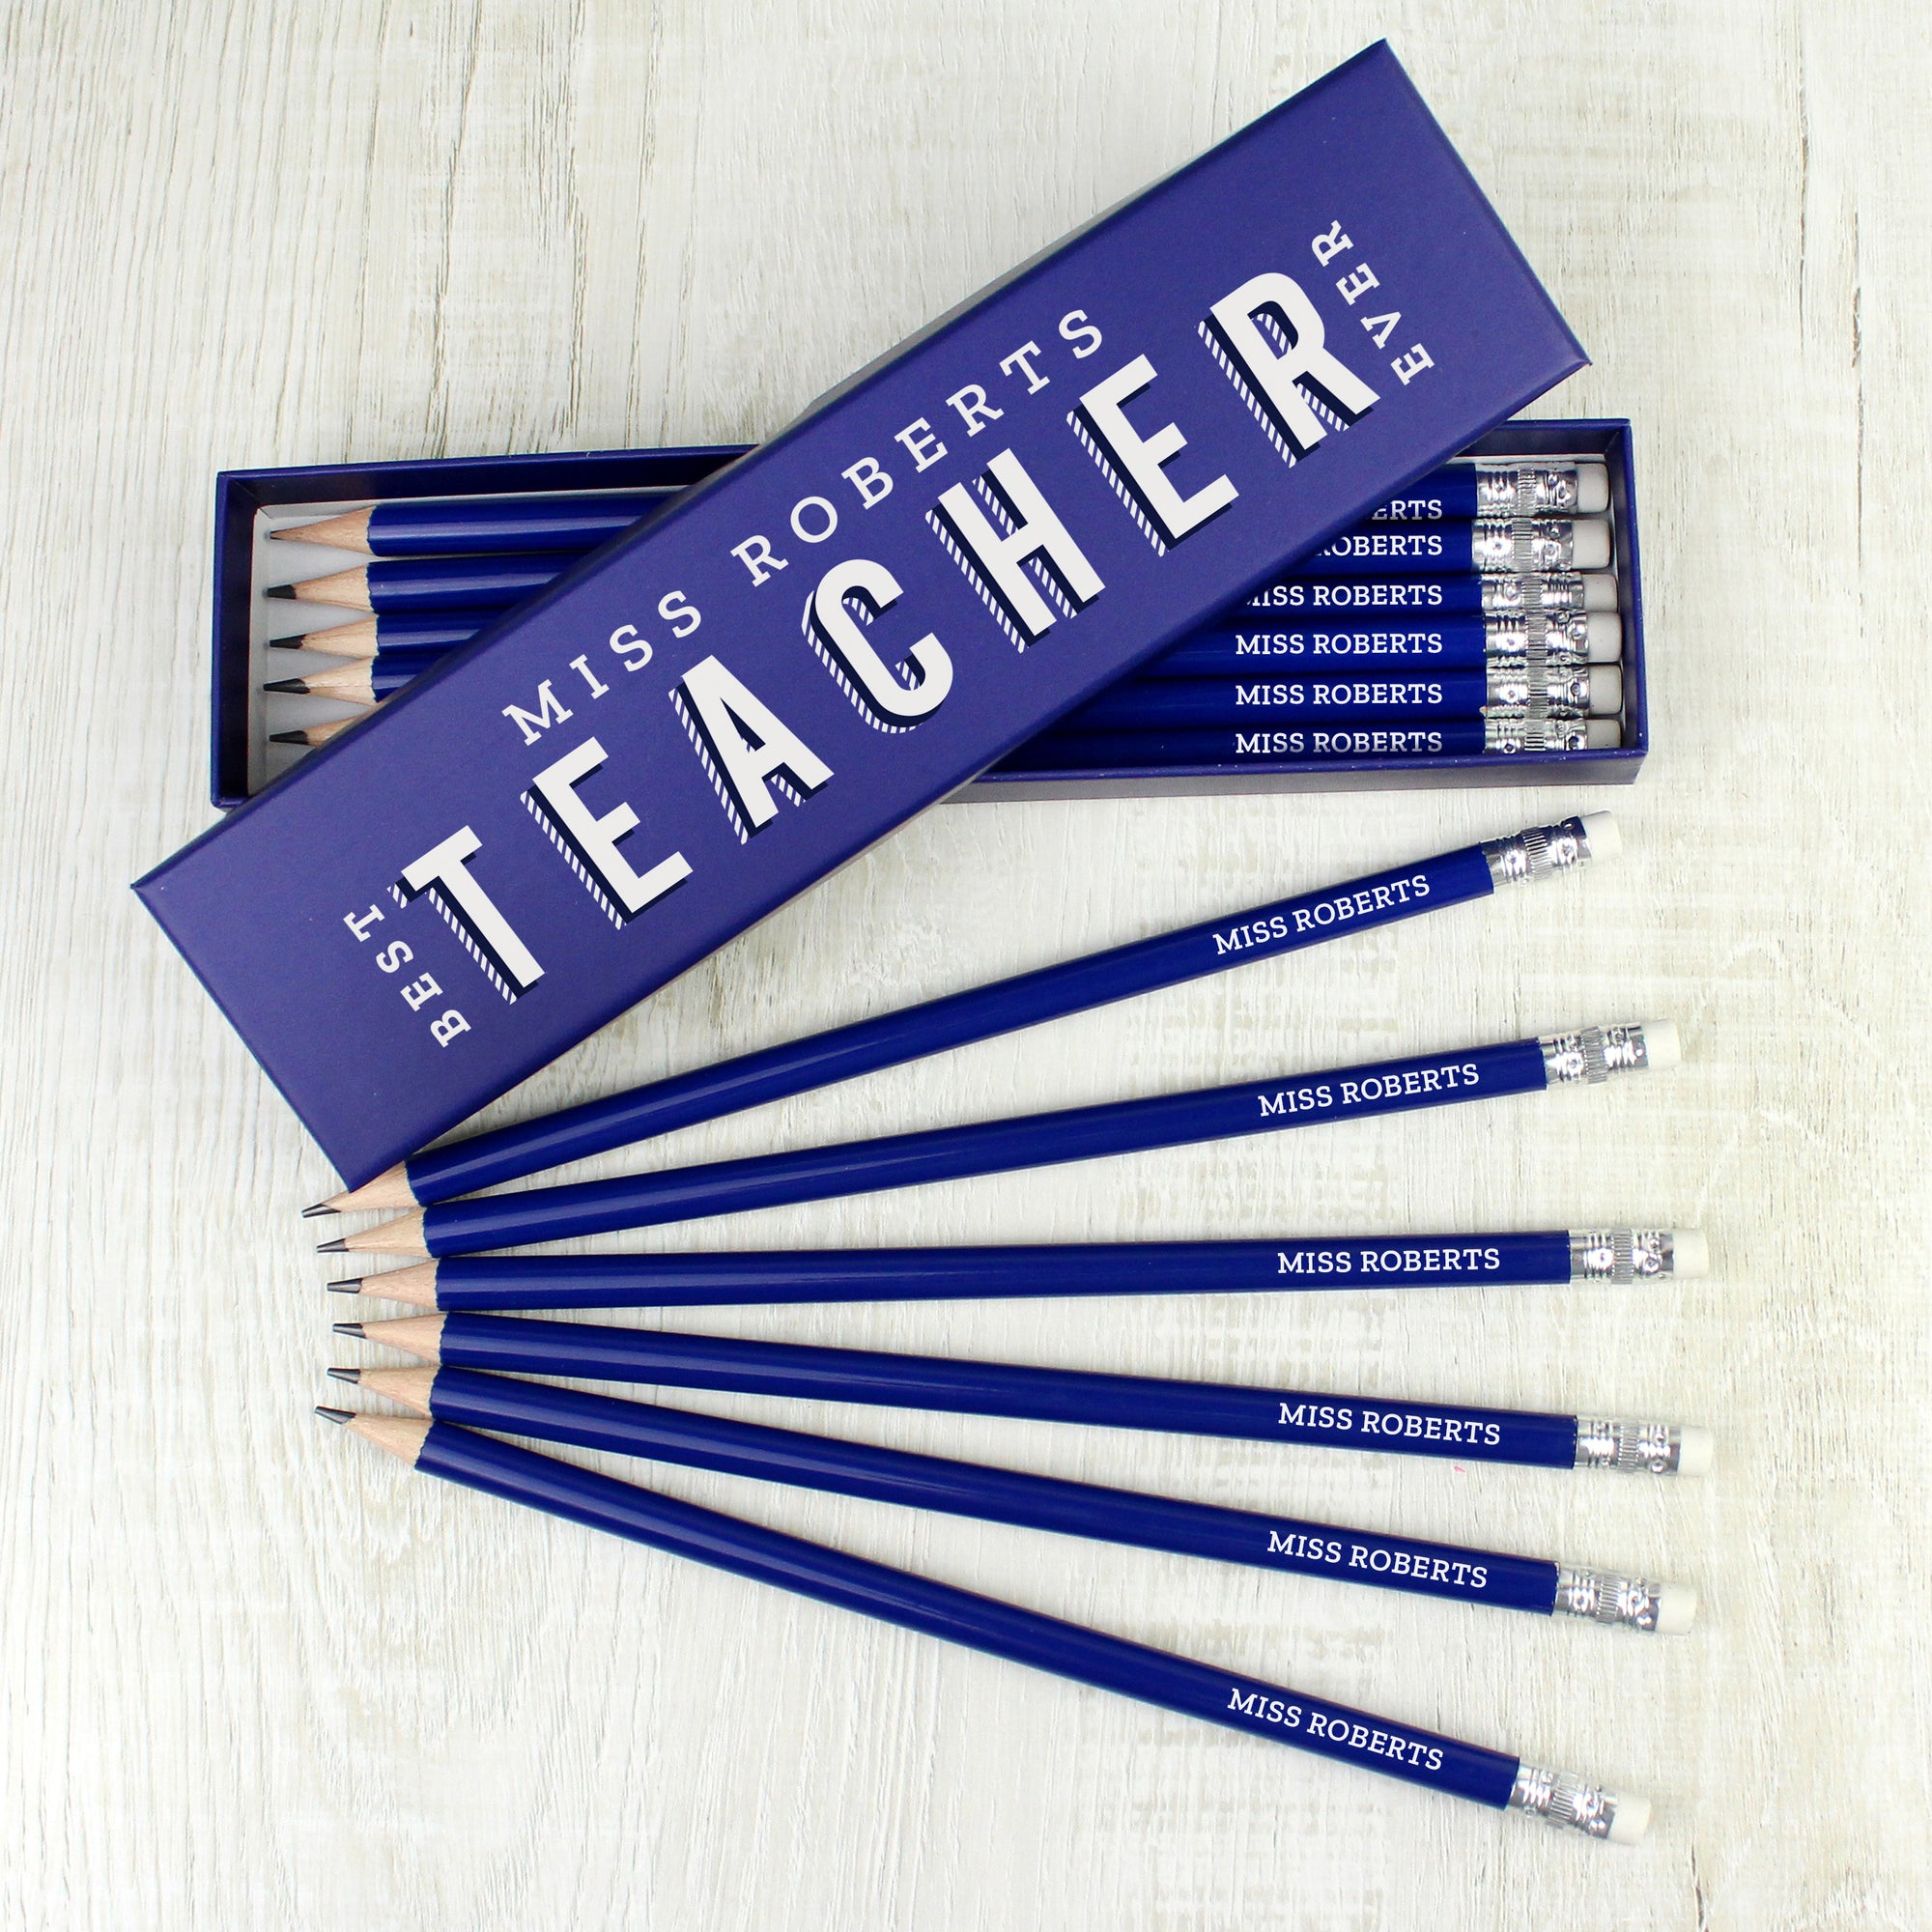 Image of a personalised box of 12 personalised pencils. The box is dark blue and can be personalised with a teacher’s name which will be followed by the fixed text of Best Teacher Ever which is printed in white modern uppercase letters. Inside the box has 12 HB pencils with a dark blue outer and a small eraser at the end. Each pencil will also be personalised with the teacher’s name in white uppercase letters.